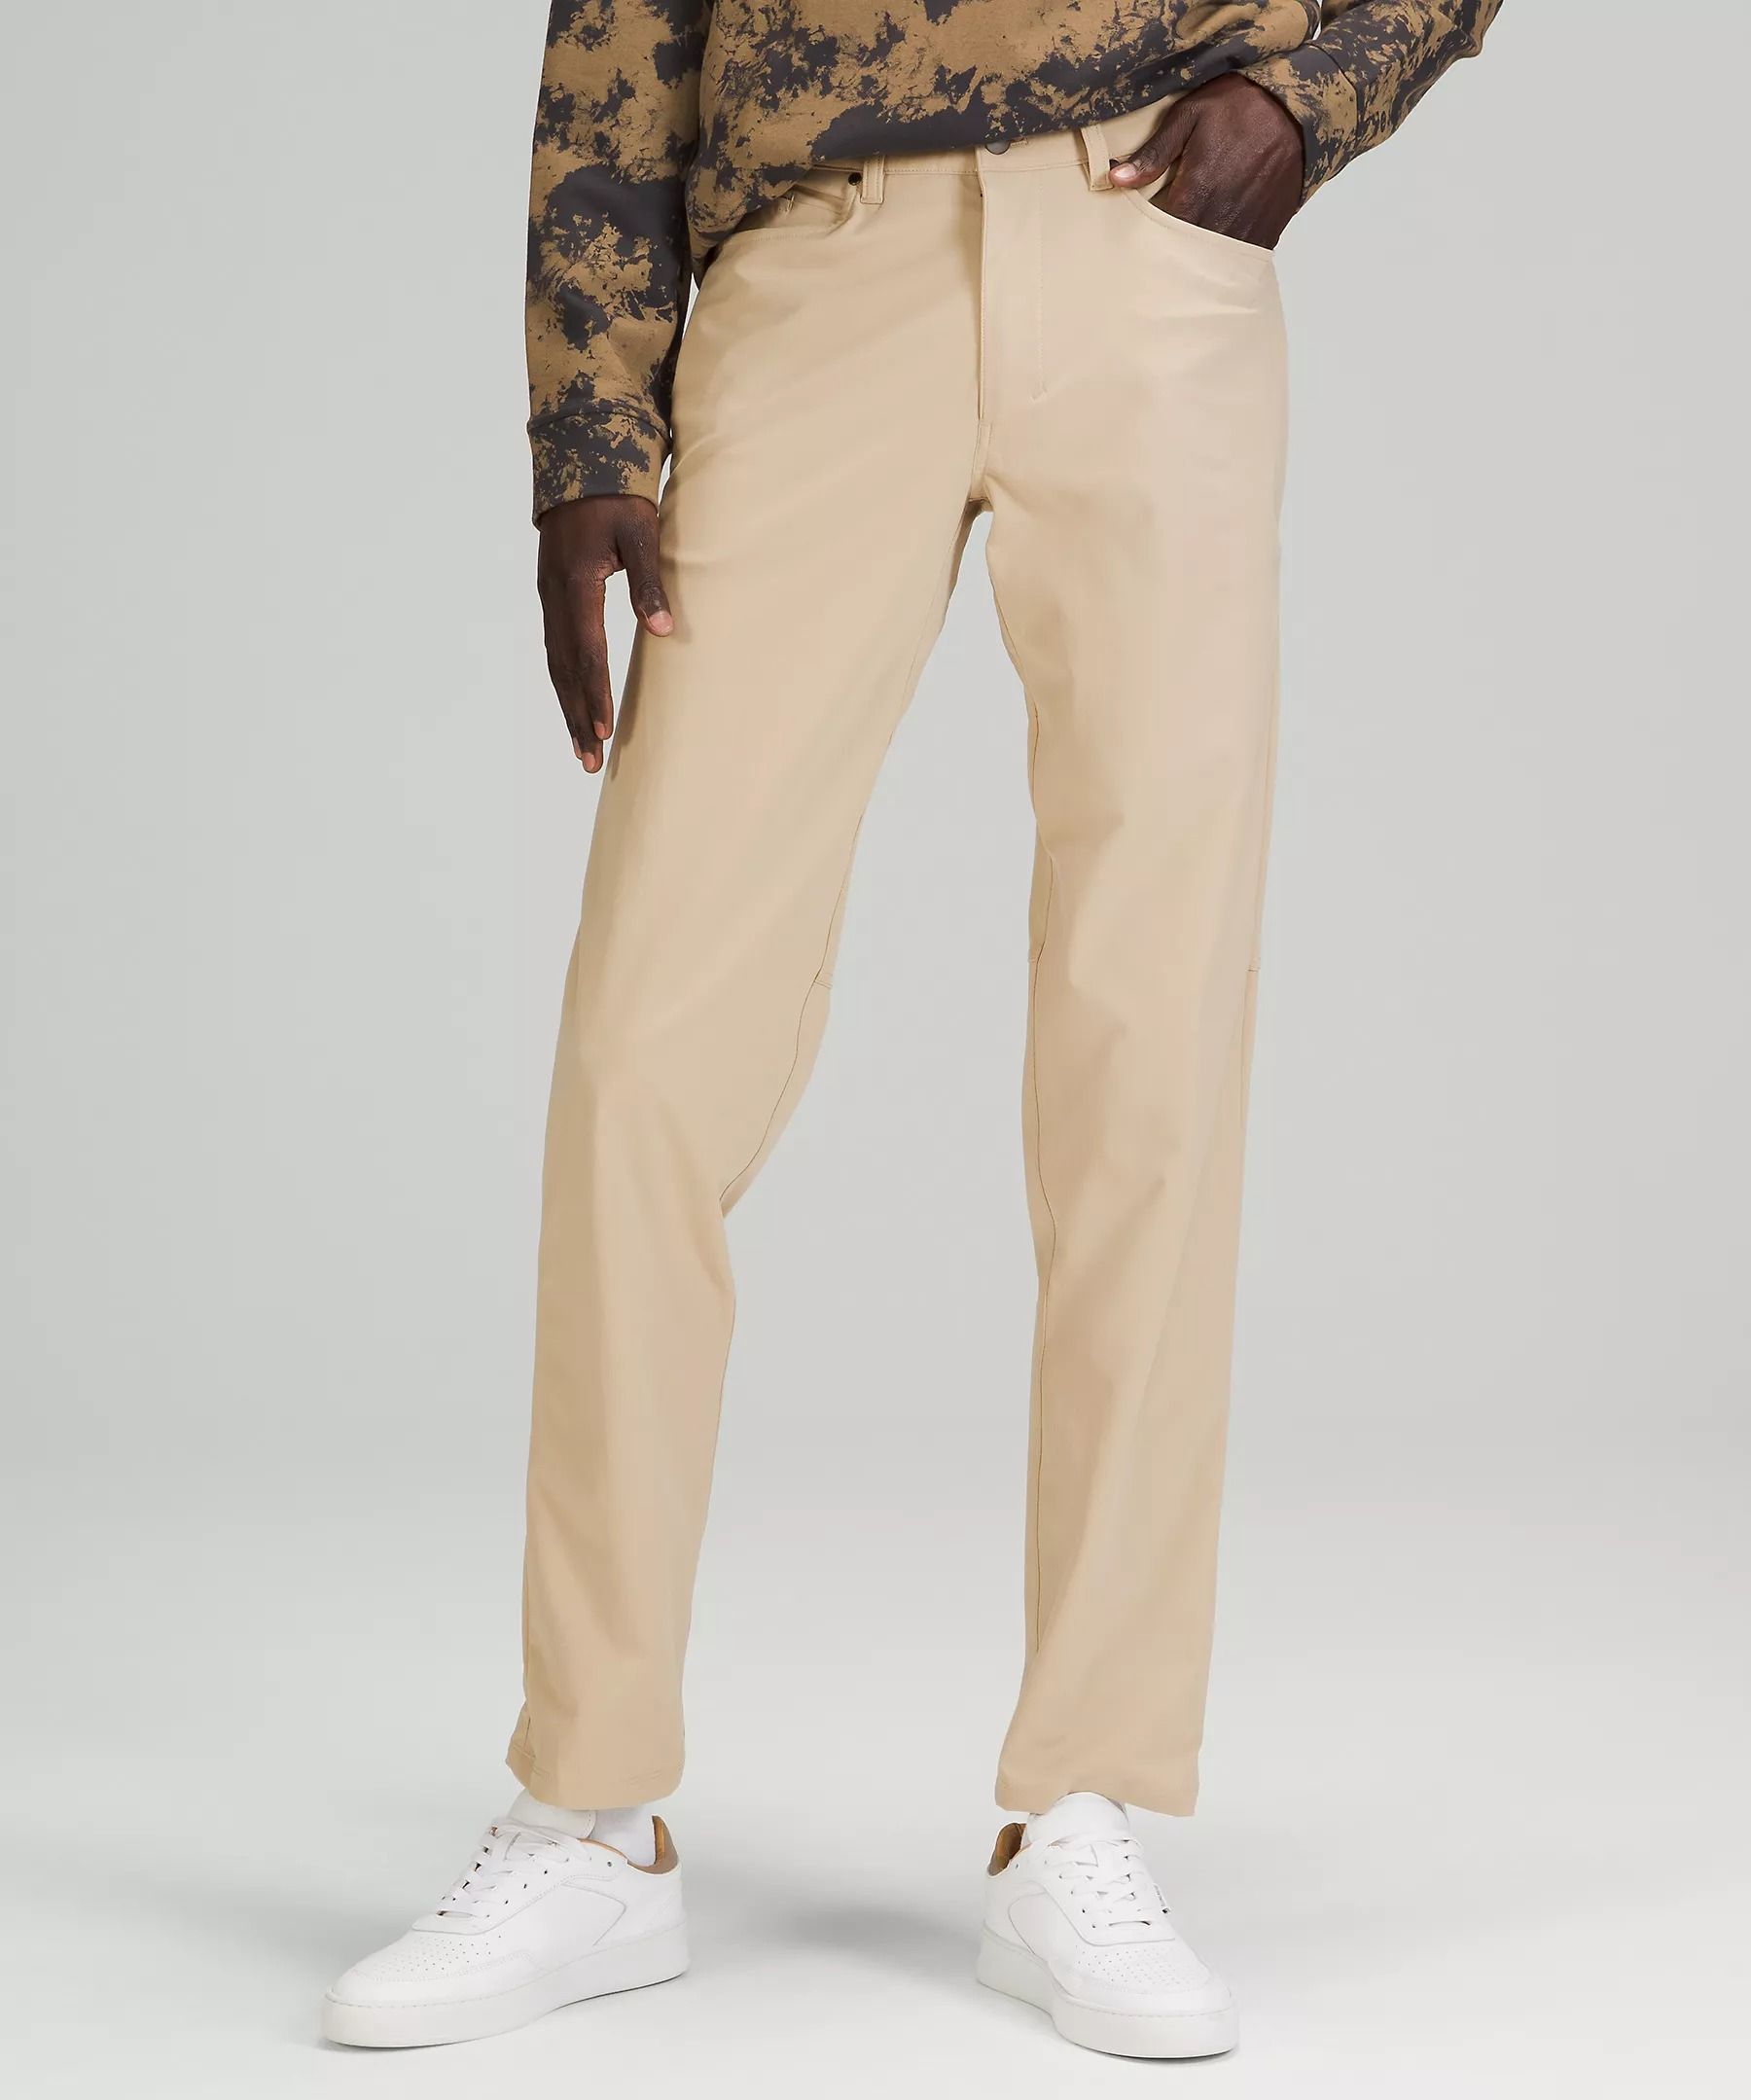 Lululemon Mens Pants Reviewed by Style Experts The Best Styles